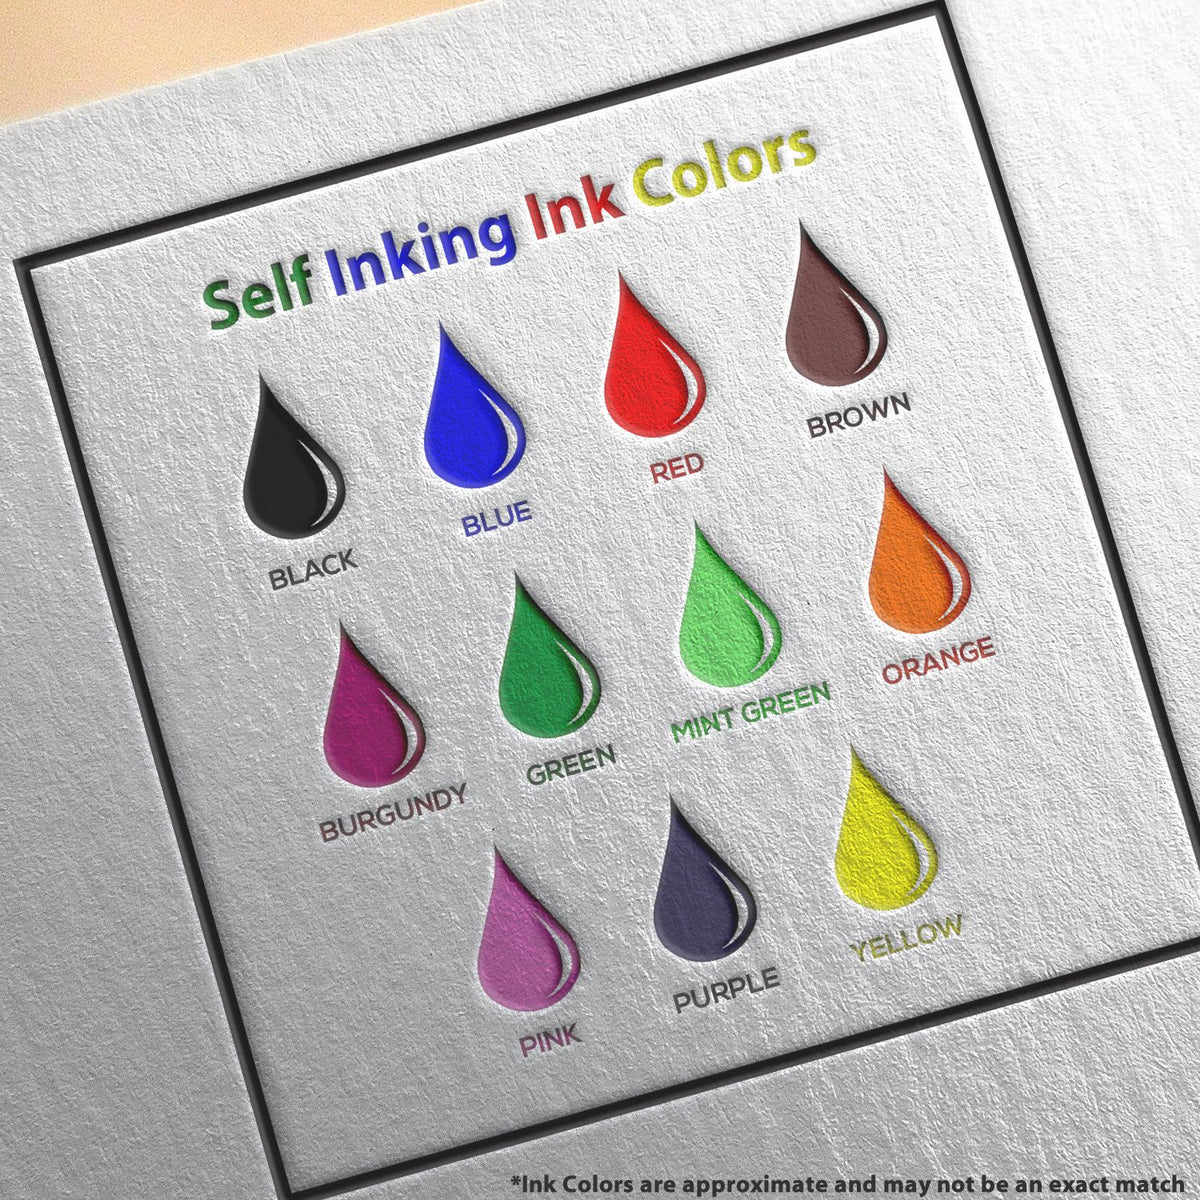 A picture showing the different ink colors or hues available for the Self-Inking Tennessee PE Stamp product.